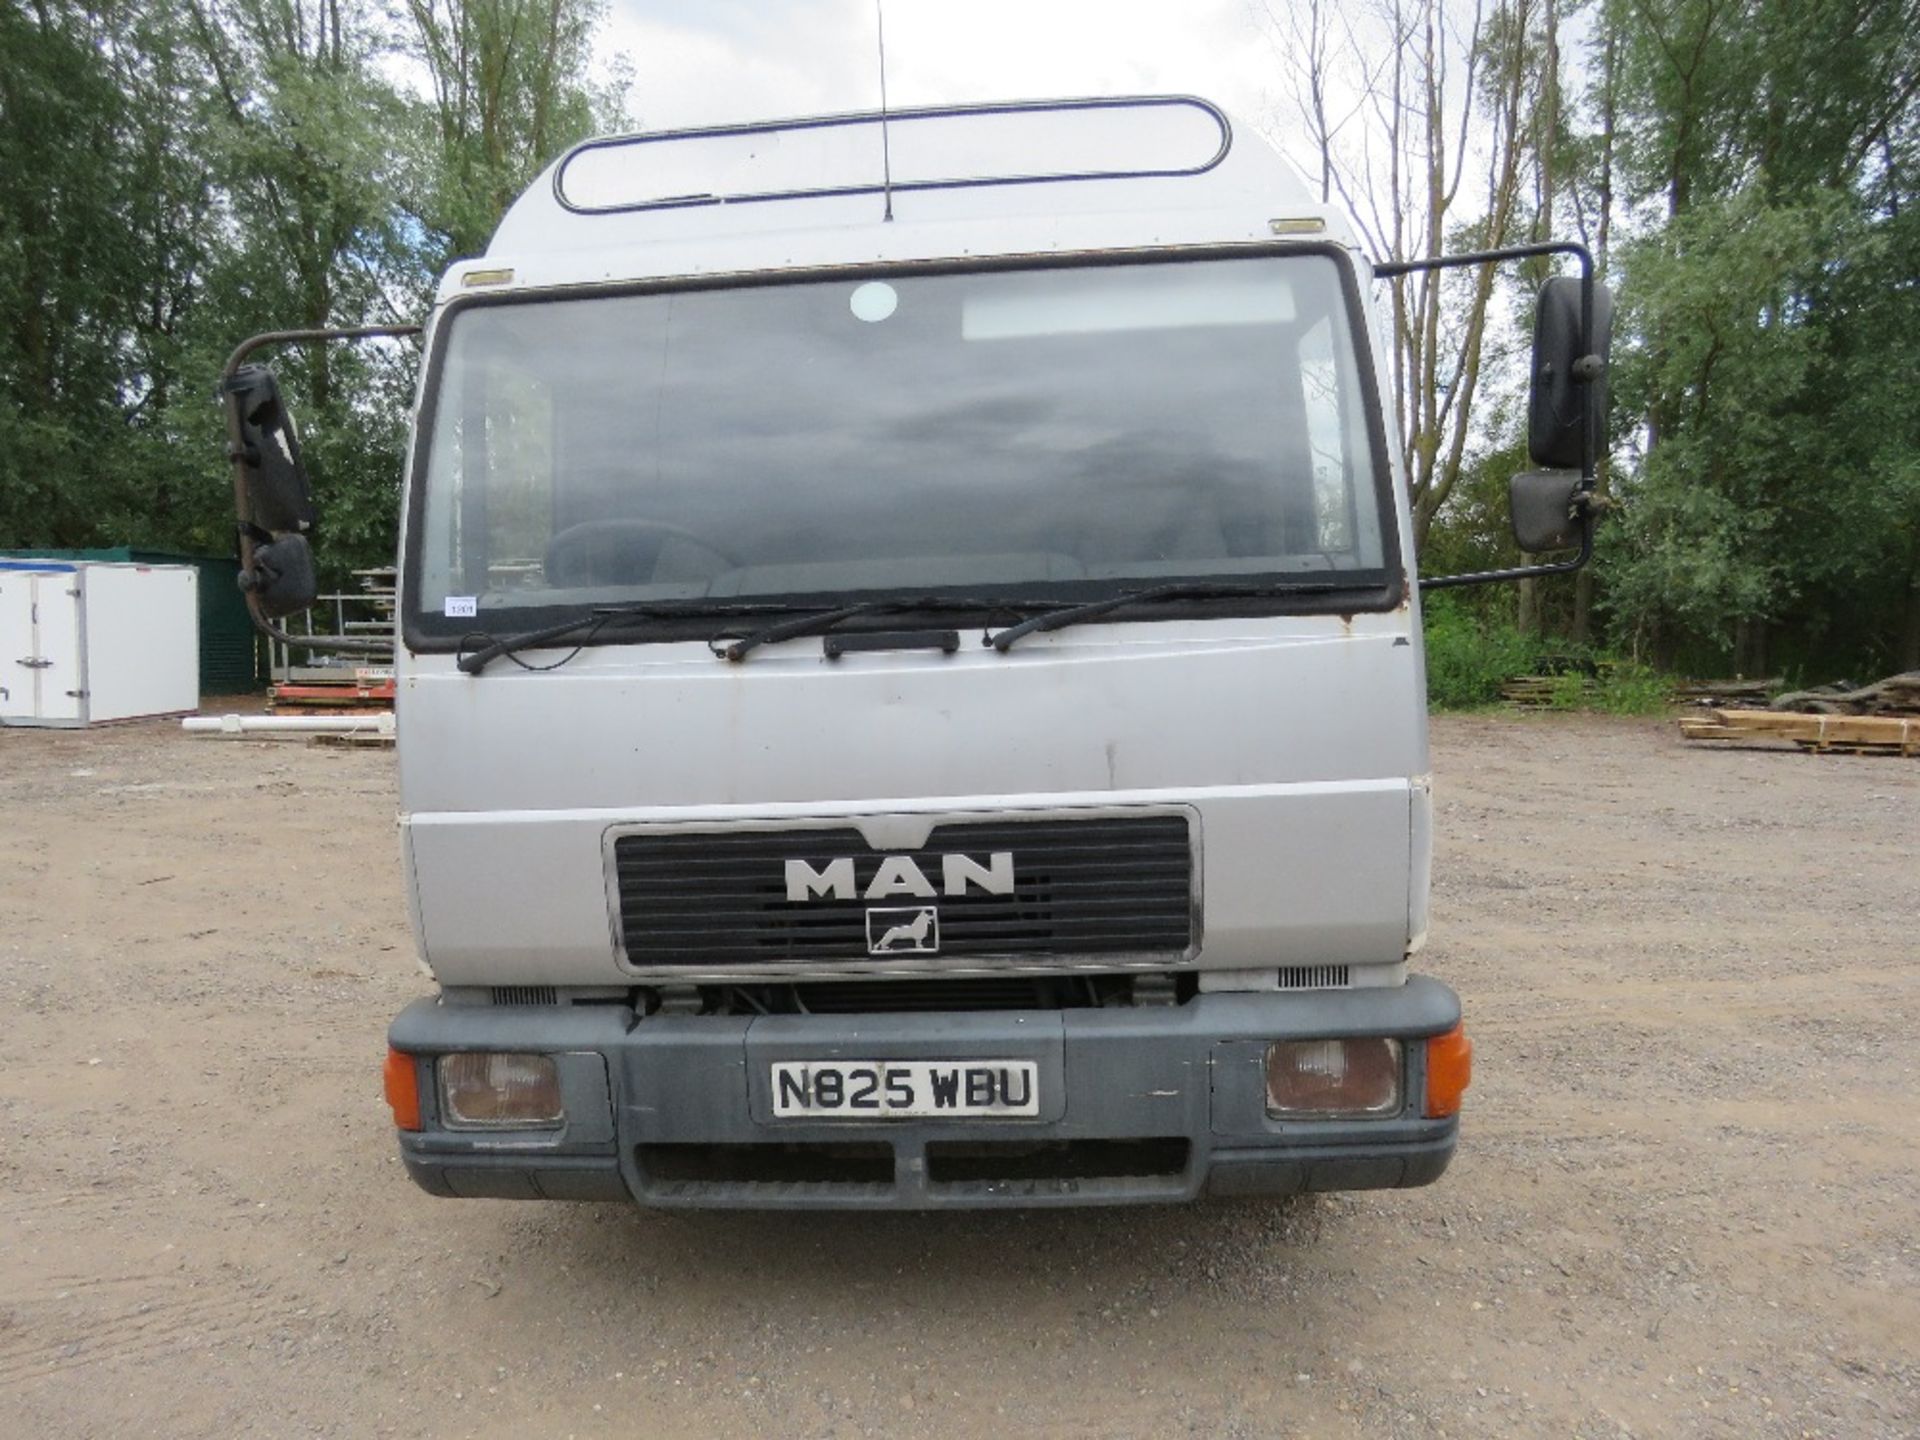 MAN 10-153 FLAT BED LORRY WITH HIAB CRANE REG:N825 WBU. 22FT BED APPROX. MANUAL GEARBOX. WHEN TESTE - Image 3 of 20